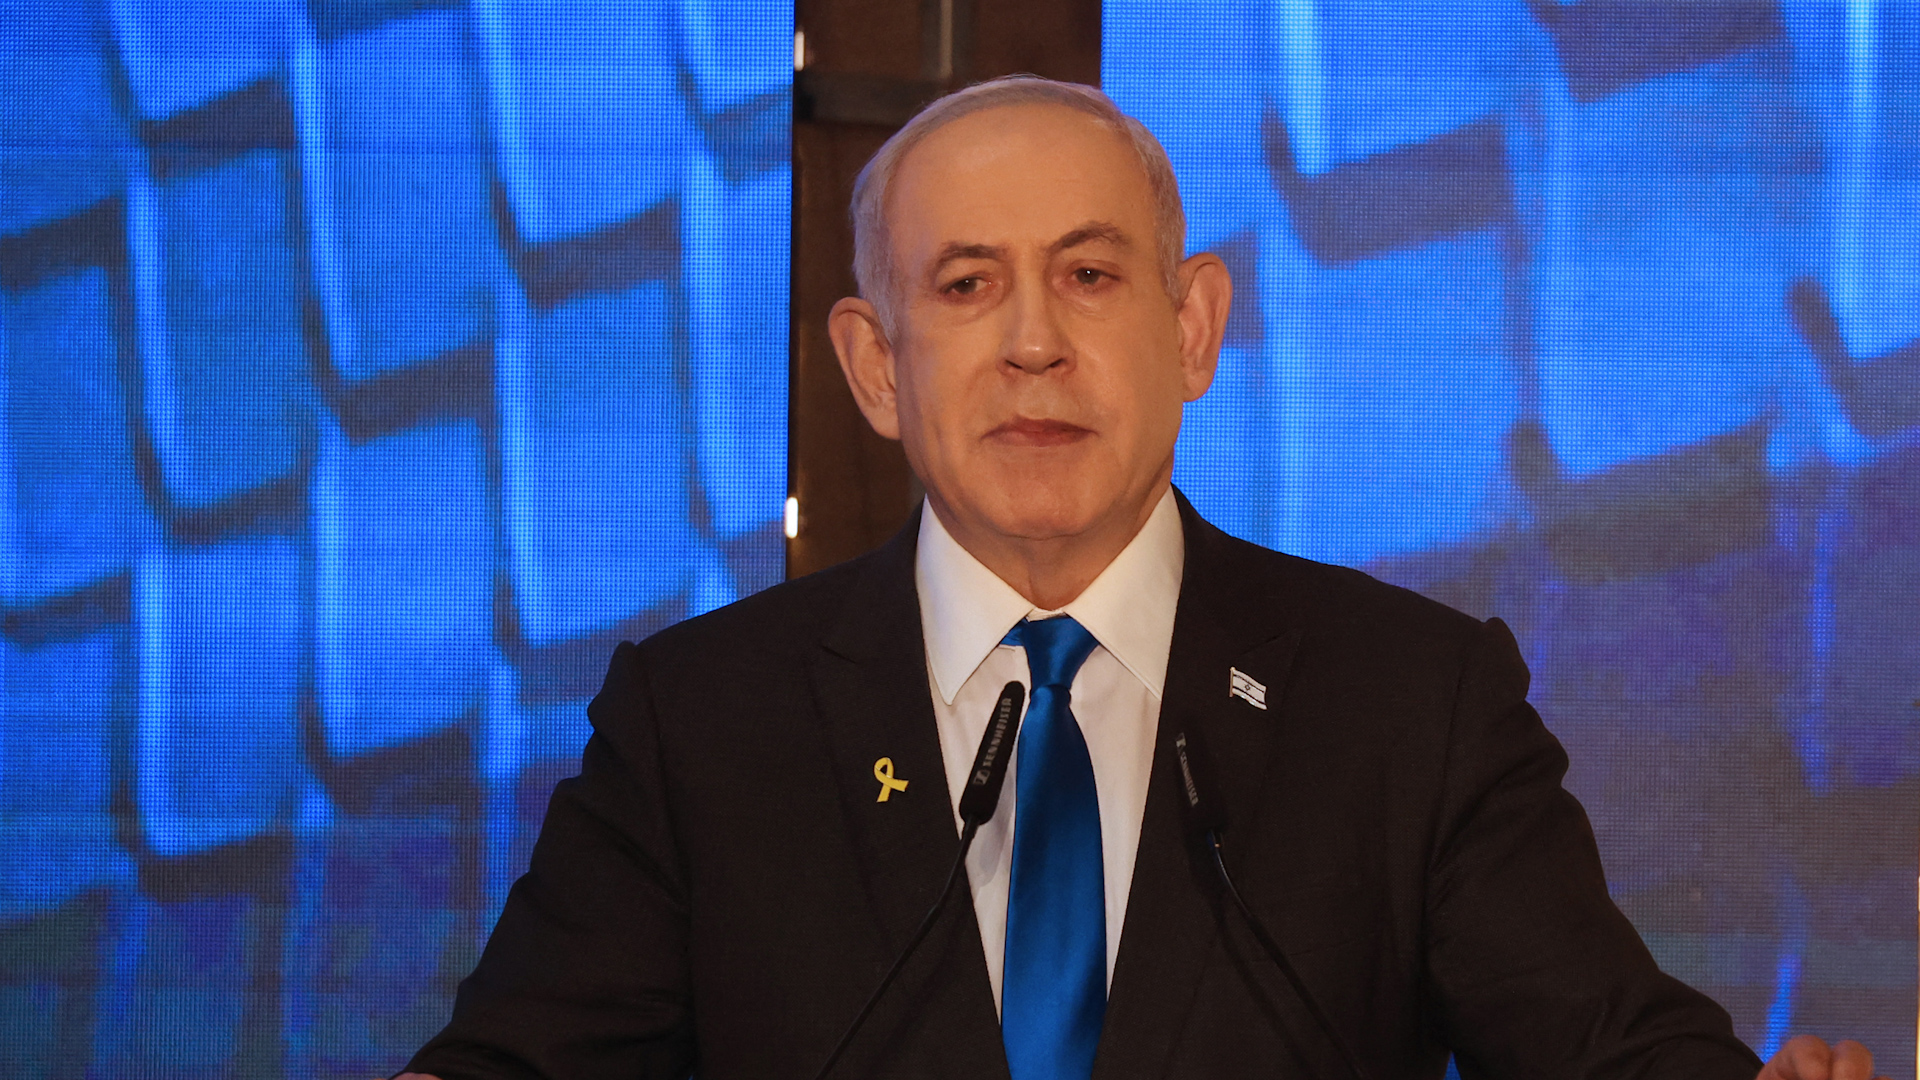 Israeli Prime Minister Benjamin Netanyahu will address Congress on July 24 to discuss Israel's war against Hamas amid growing U.S. tensions.